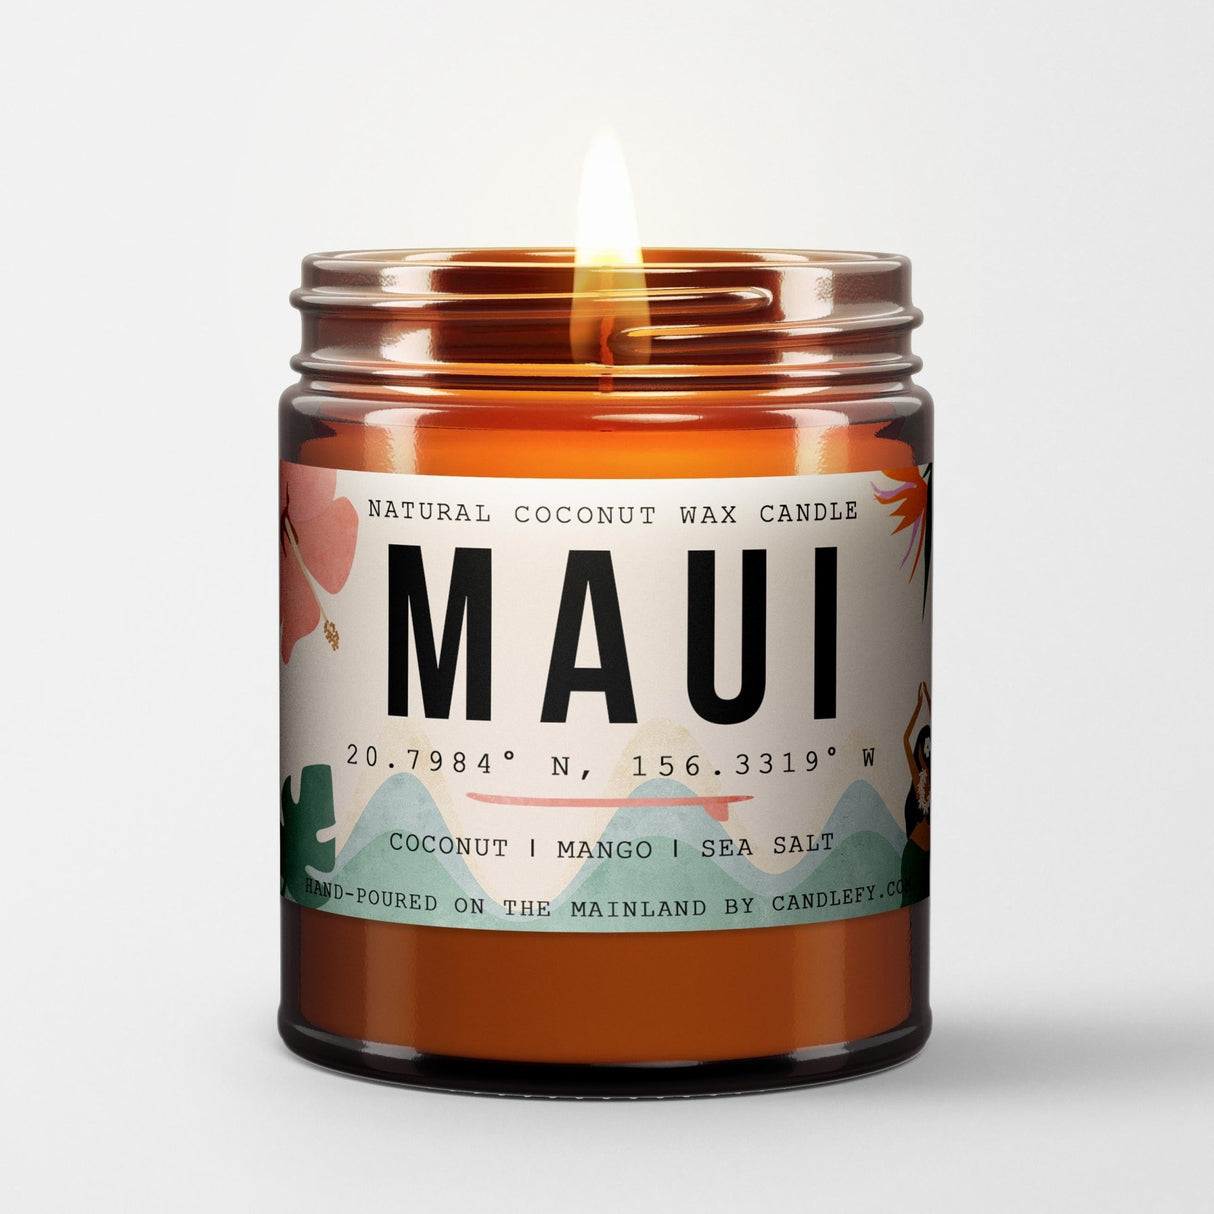 Lava: Premium Scented Candle Made With Natural Coconut Wax